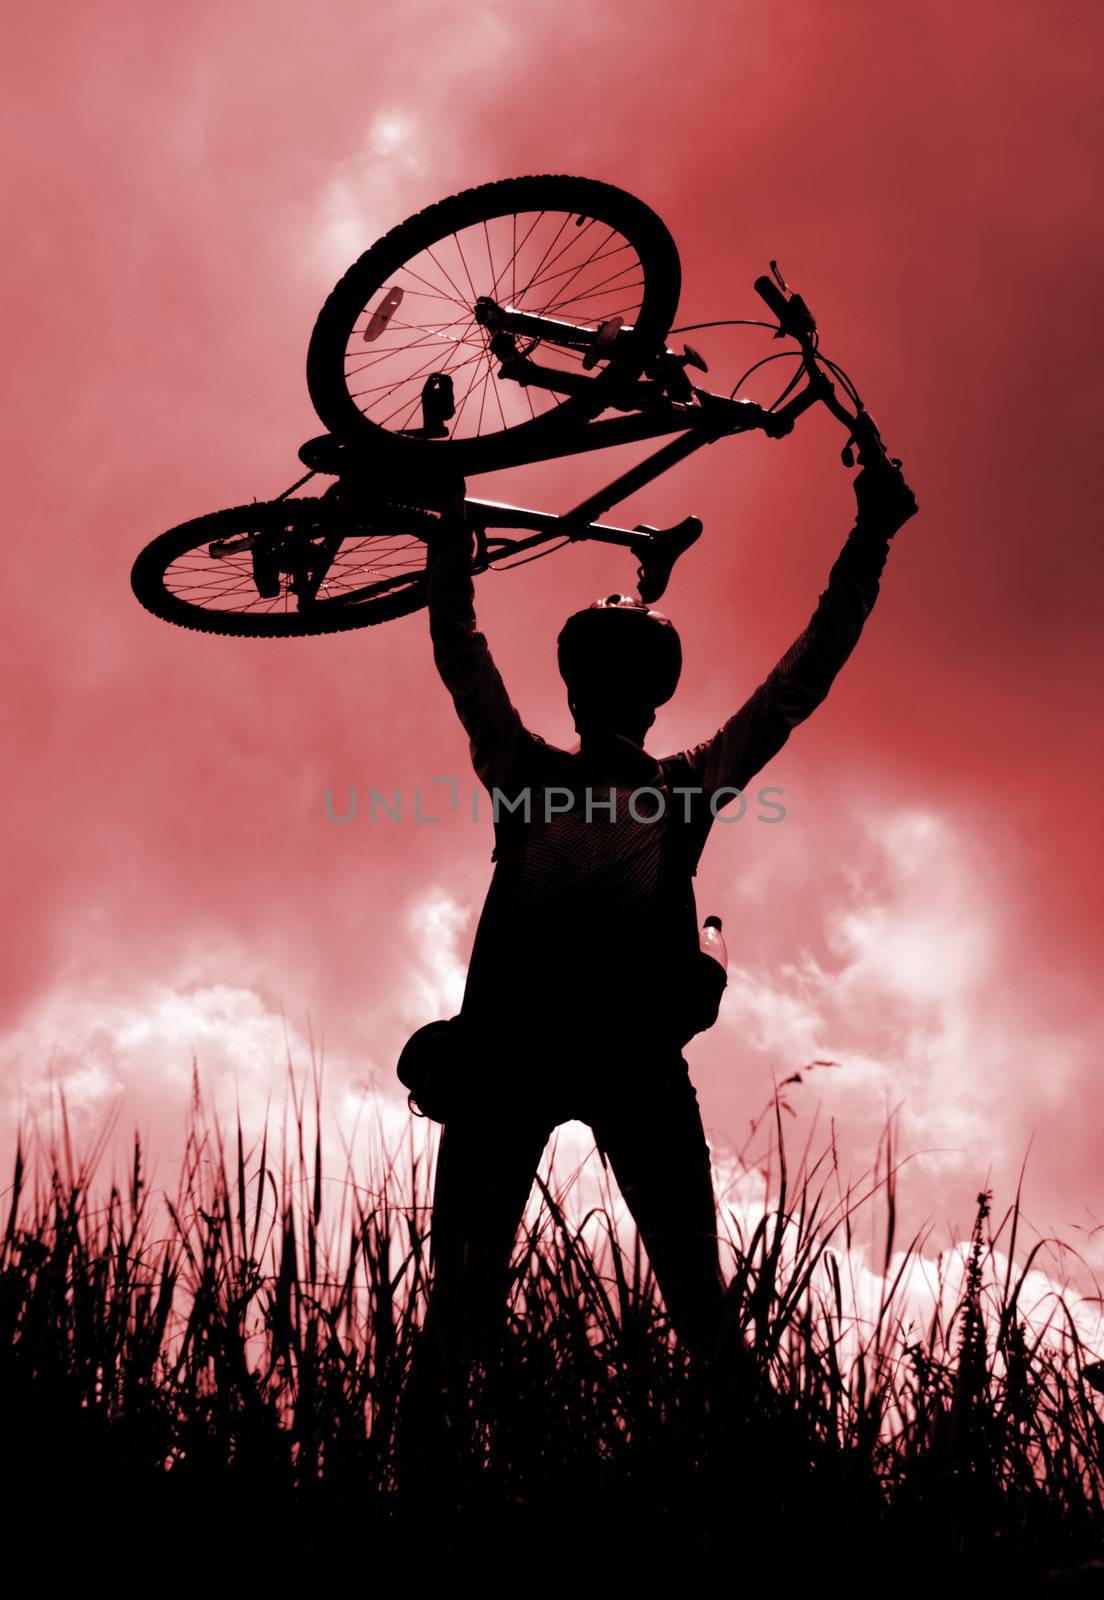 Silhouette of a biker holding his bicycle, red tint